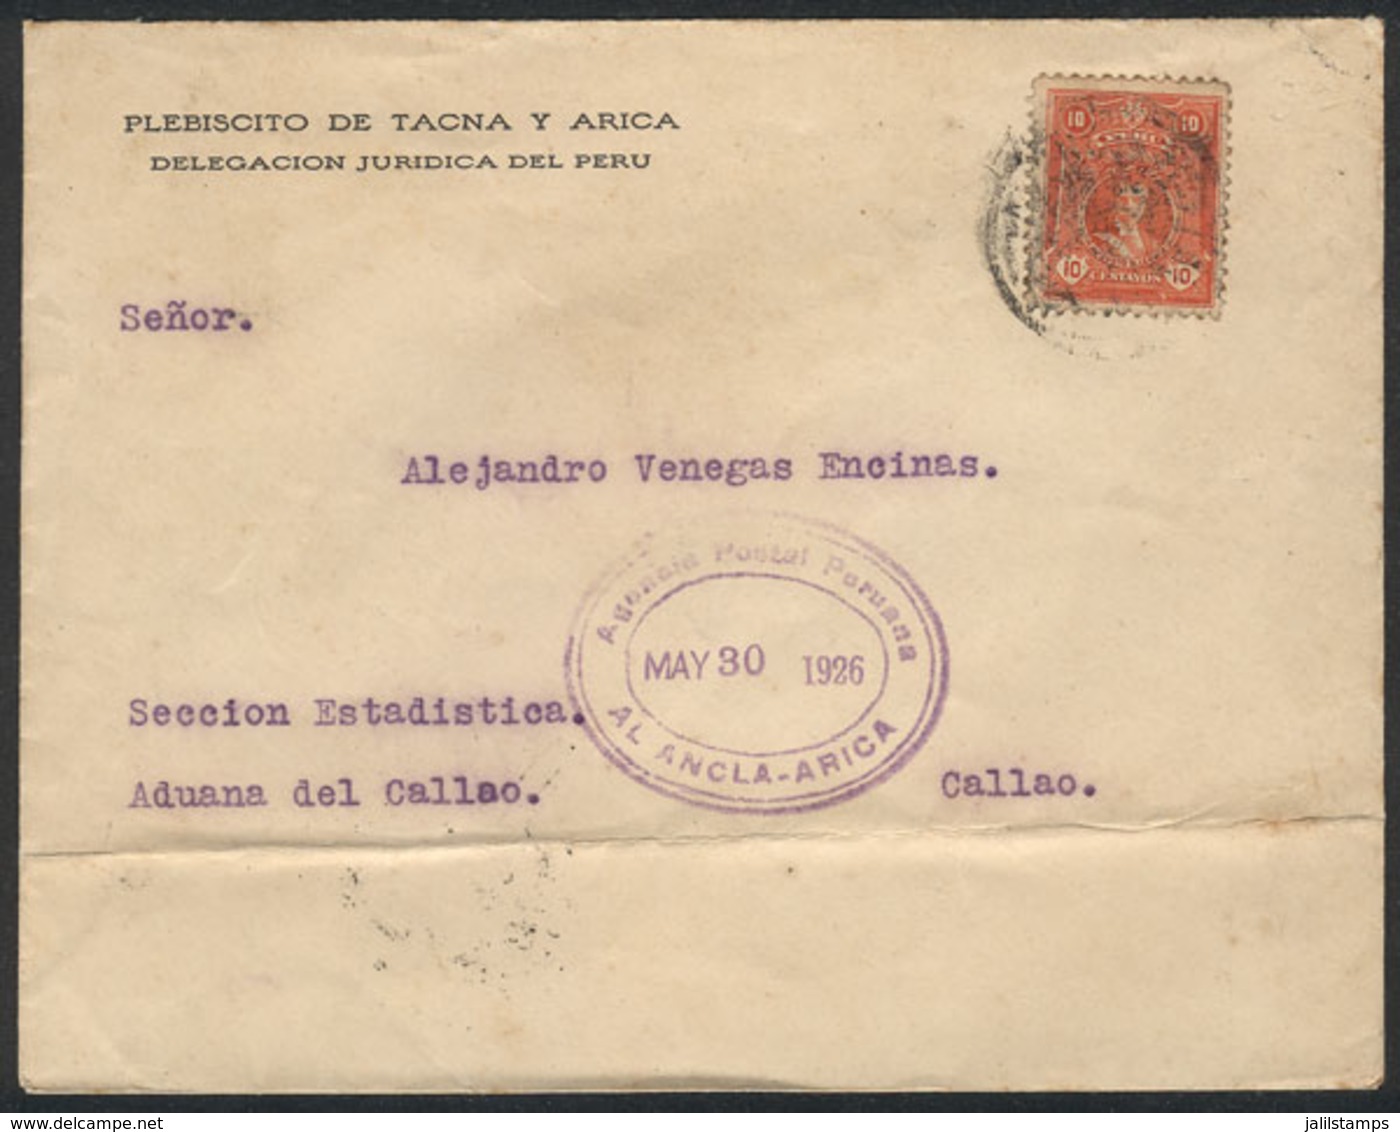 PERU: Cover Franked By Sc.245 And Sent To El Callao On 30/MAY/1926, With Interesting Oval Agencia Postal Peruana - EL AN - Pérou